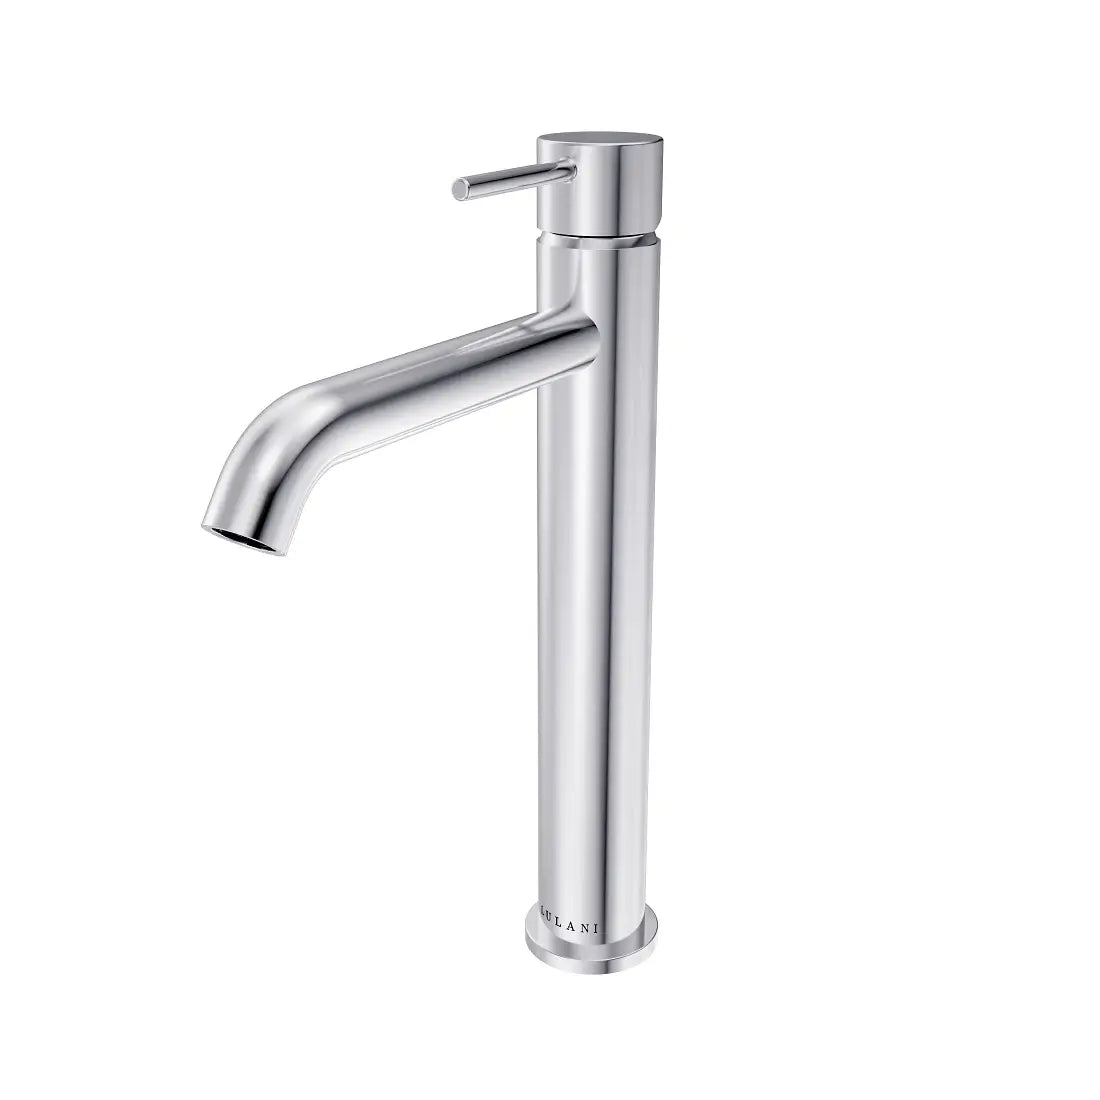 St. Lucia - Vessel Height Bathroom Faucet (petite) with drain assembly